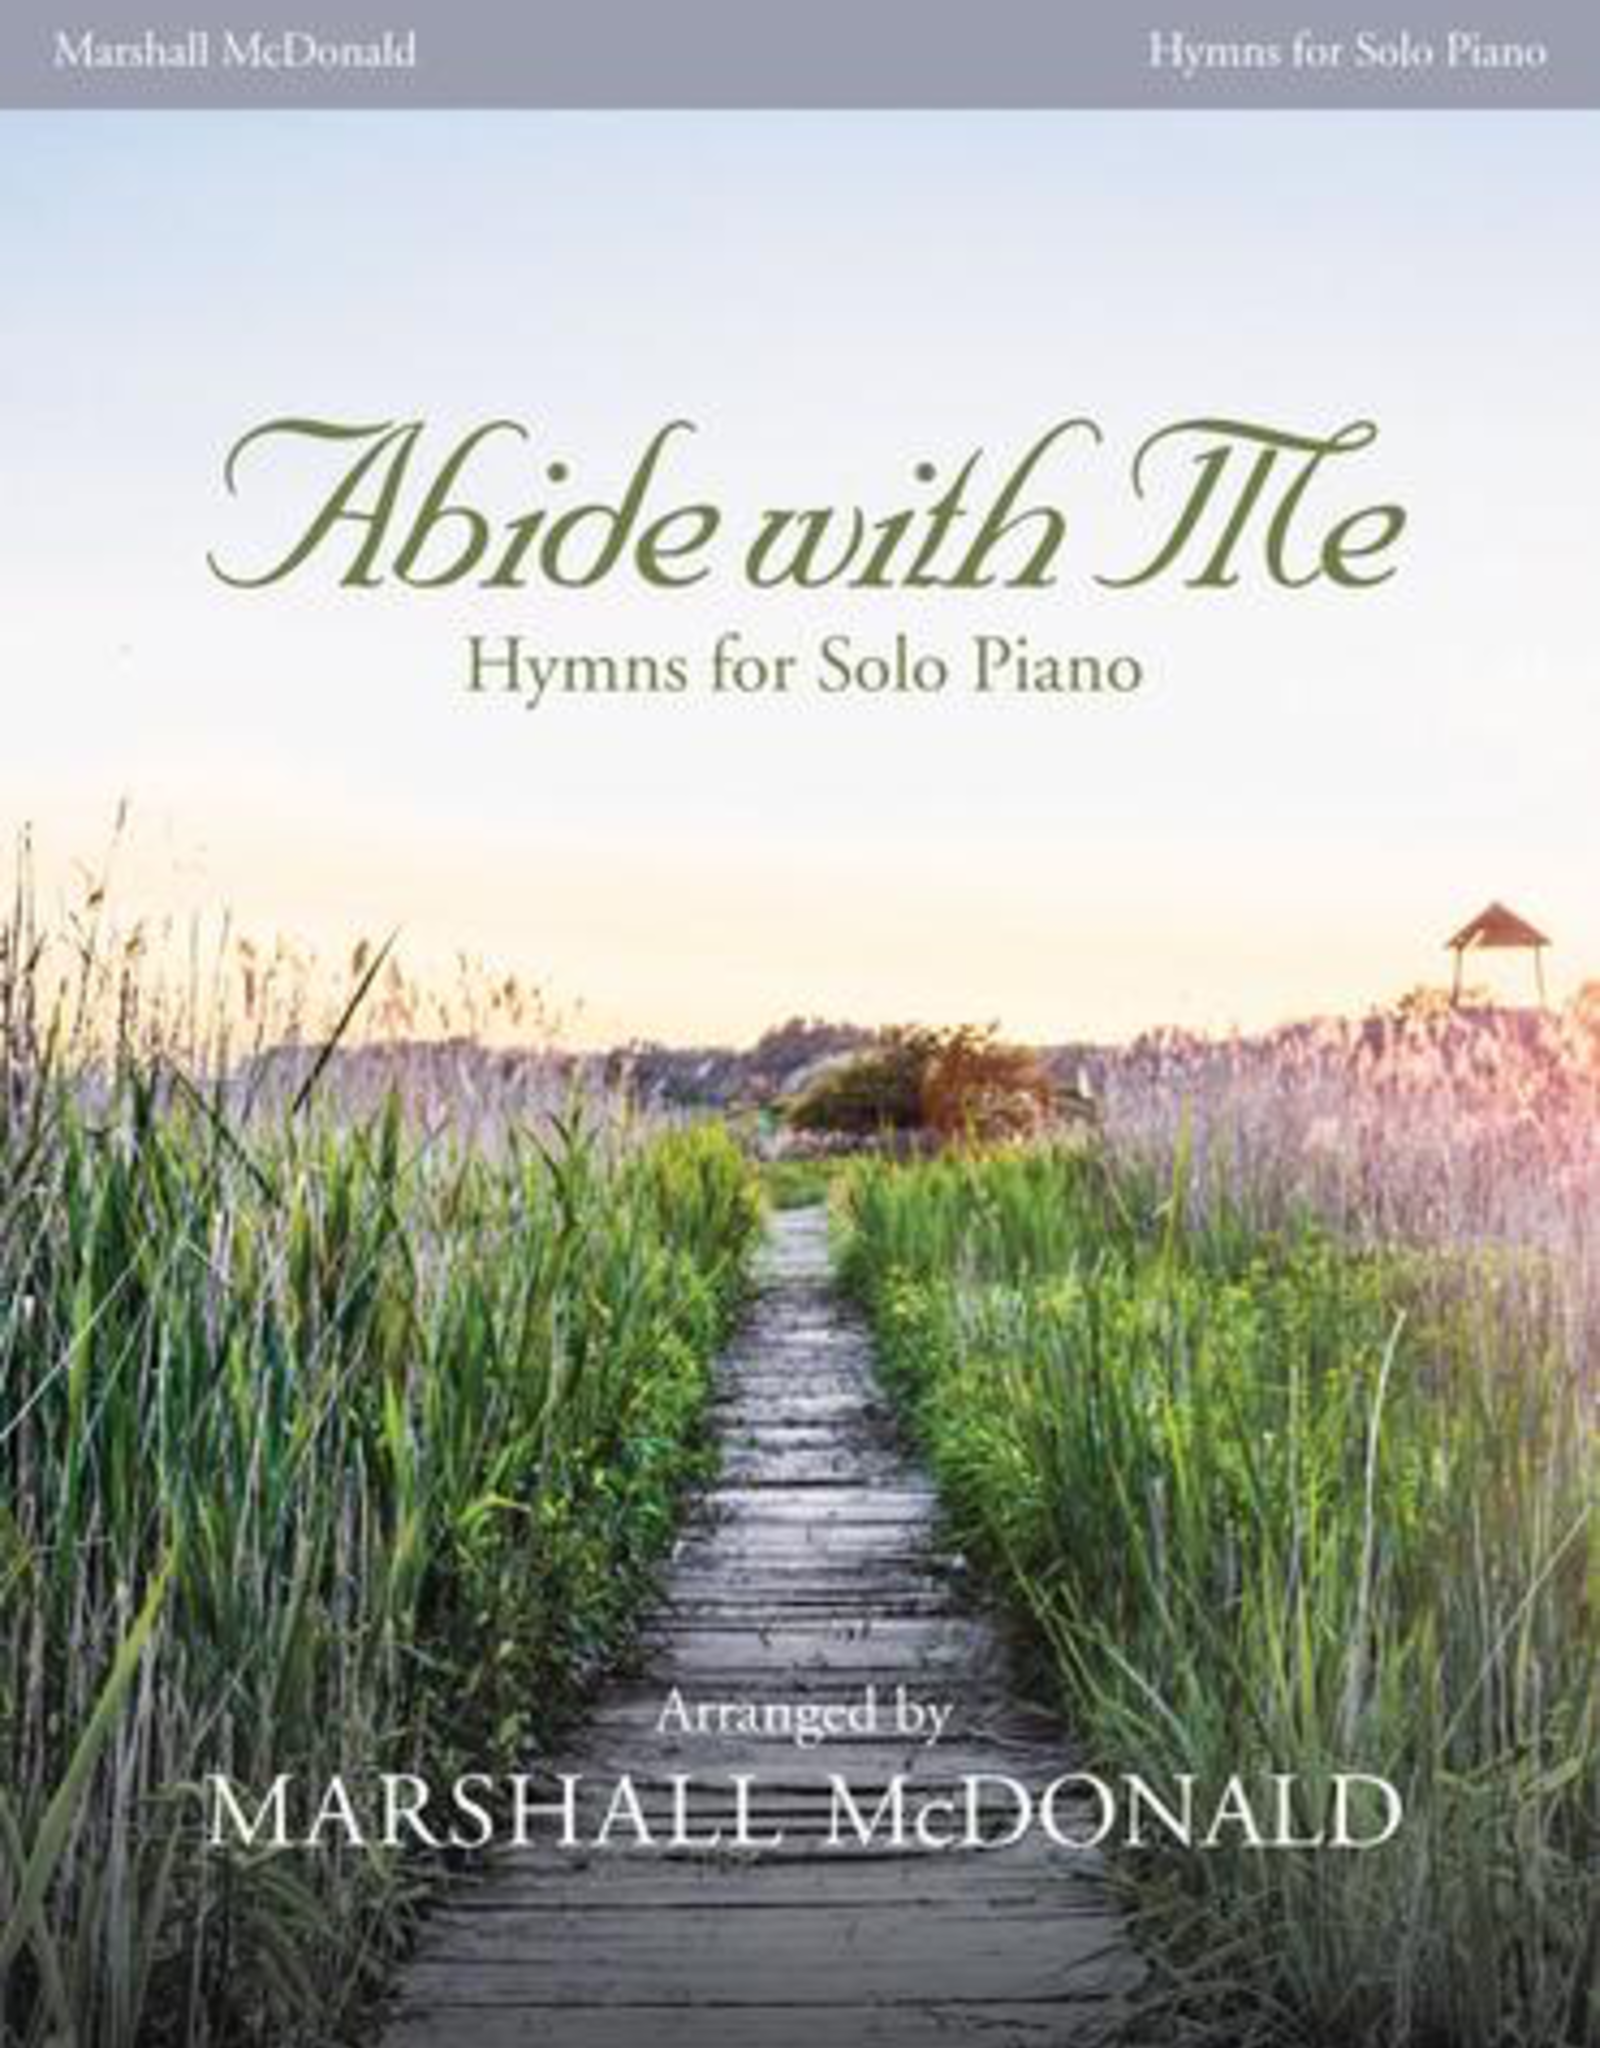 Marshall McDonald Music Abide With Me - Hymns for Solo Piano by Marshall McDonald